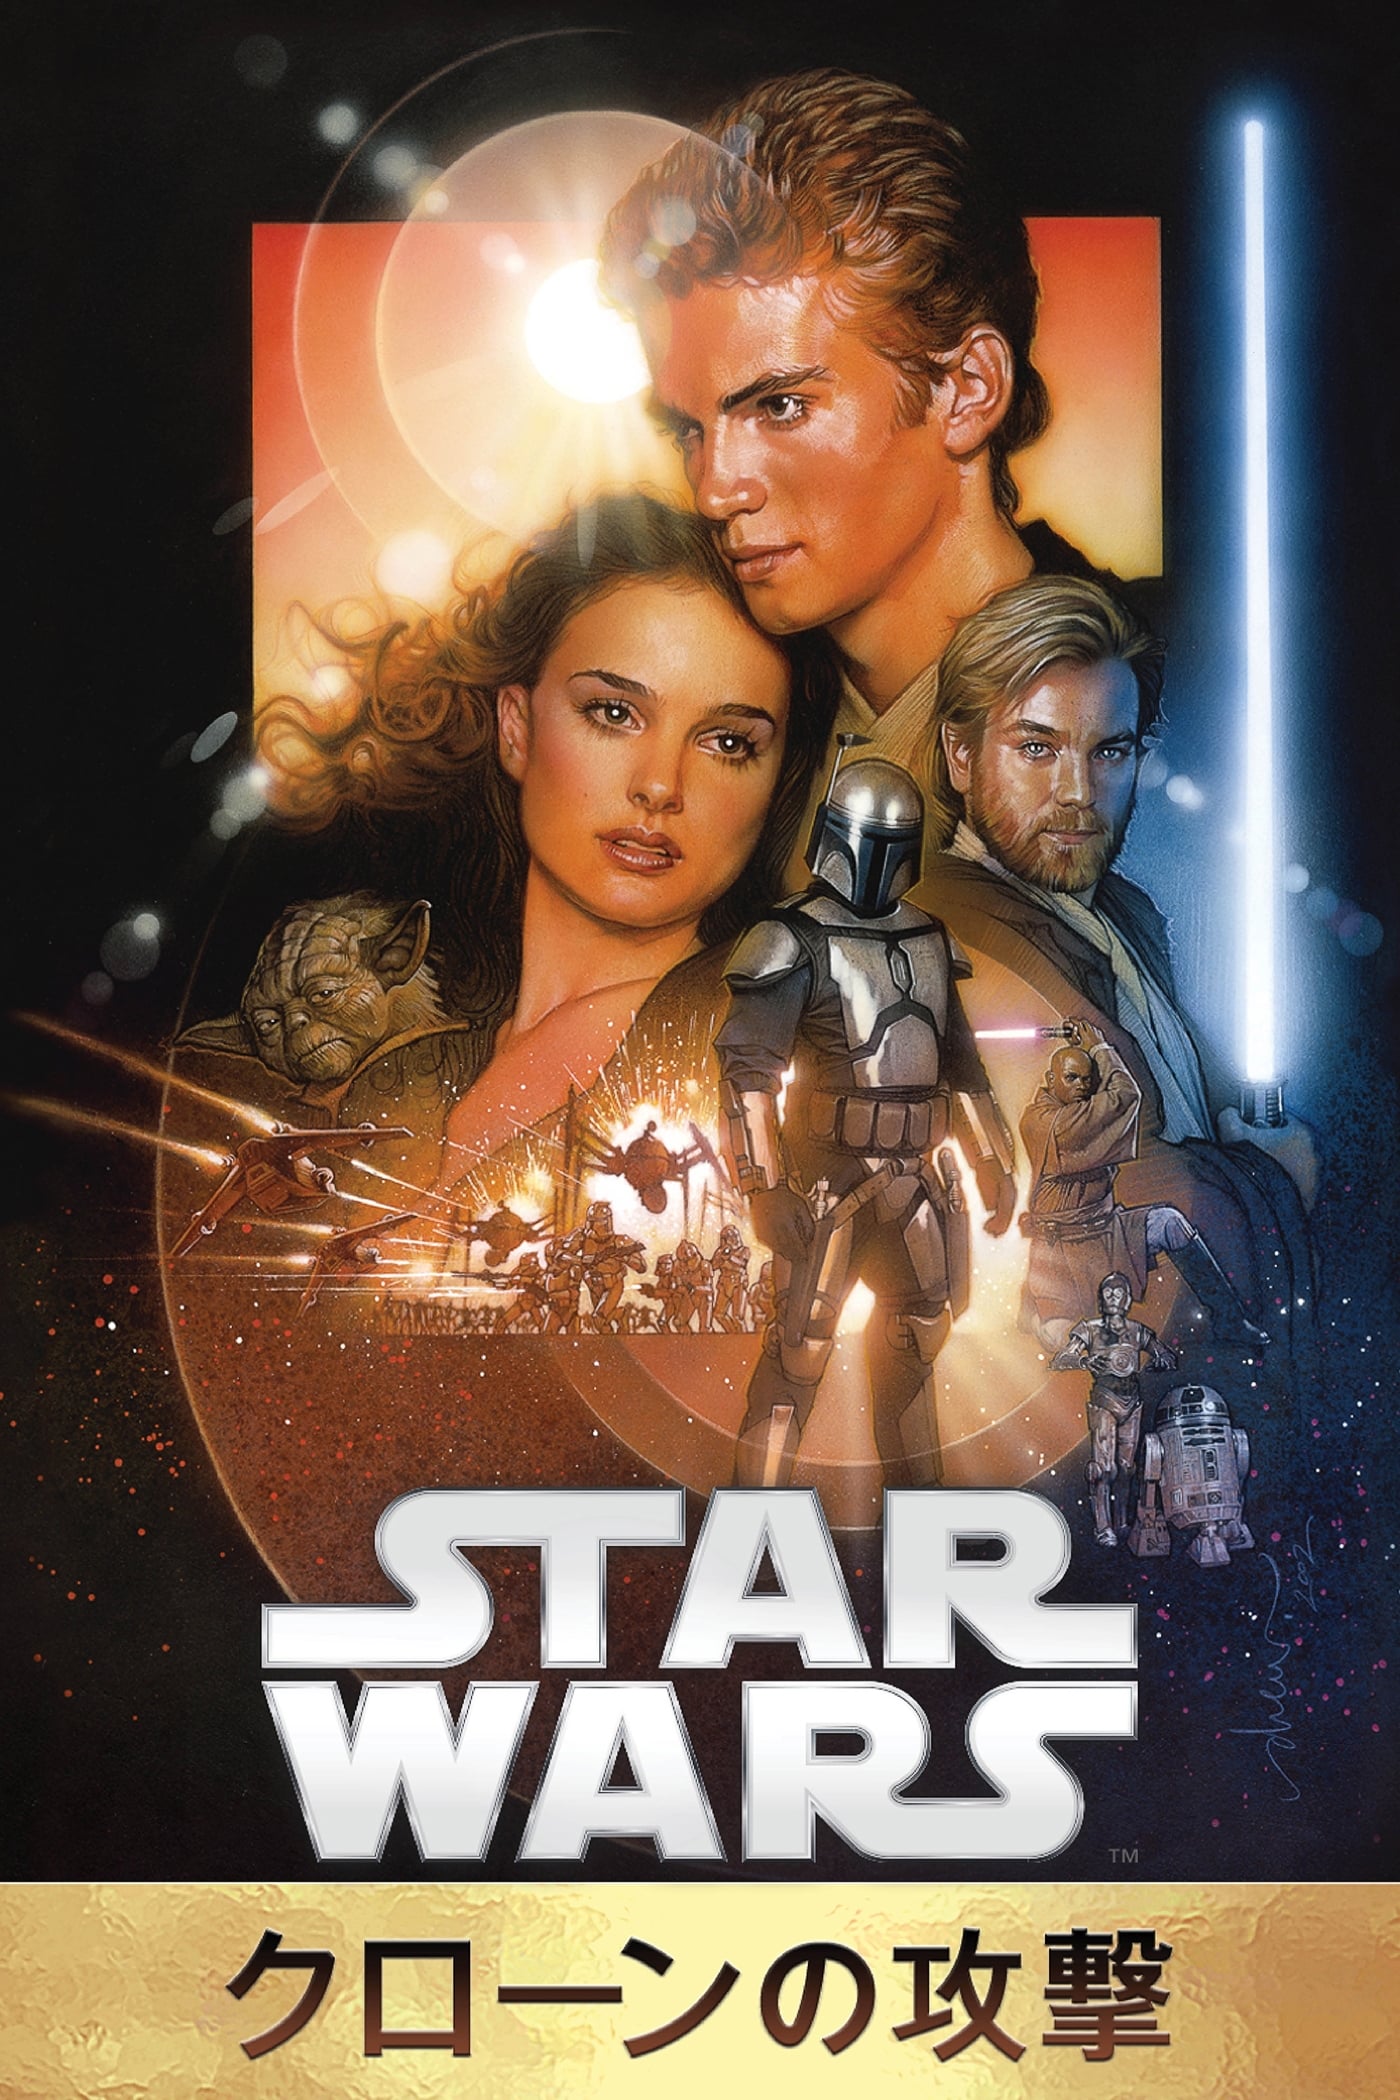 Star Wars: Episode II - Attack of the Clones (2002) - Posters — The